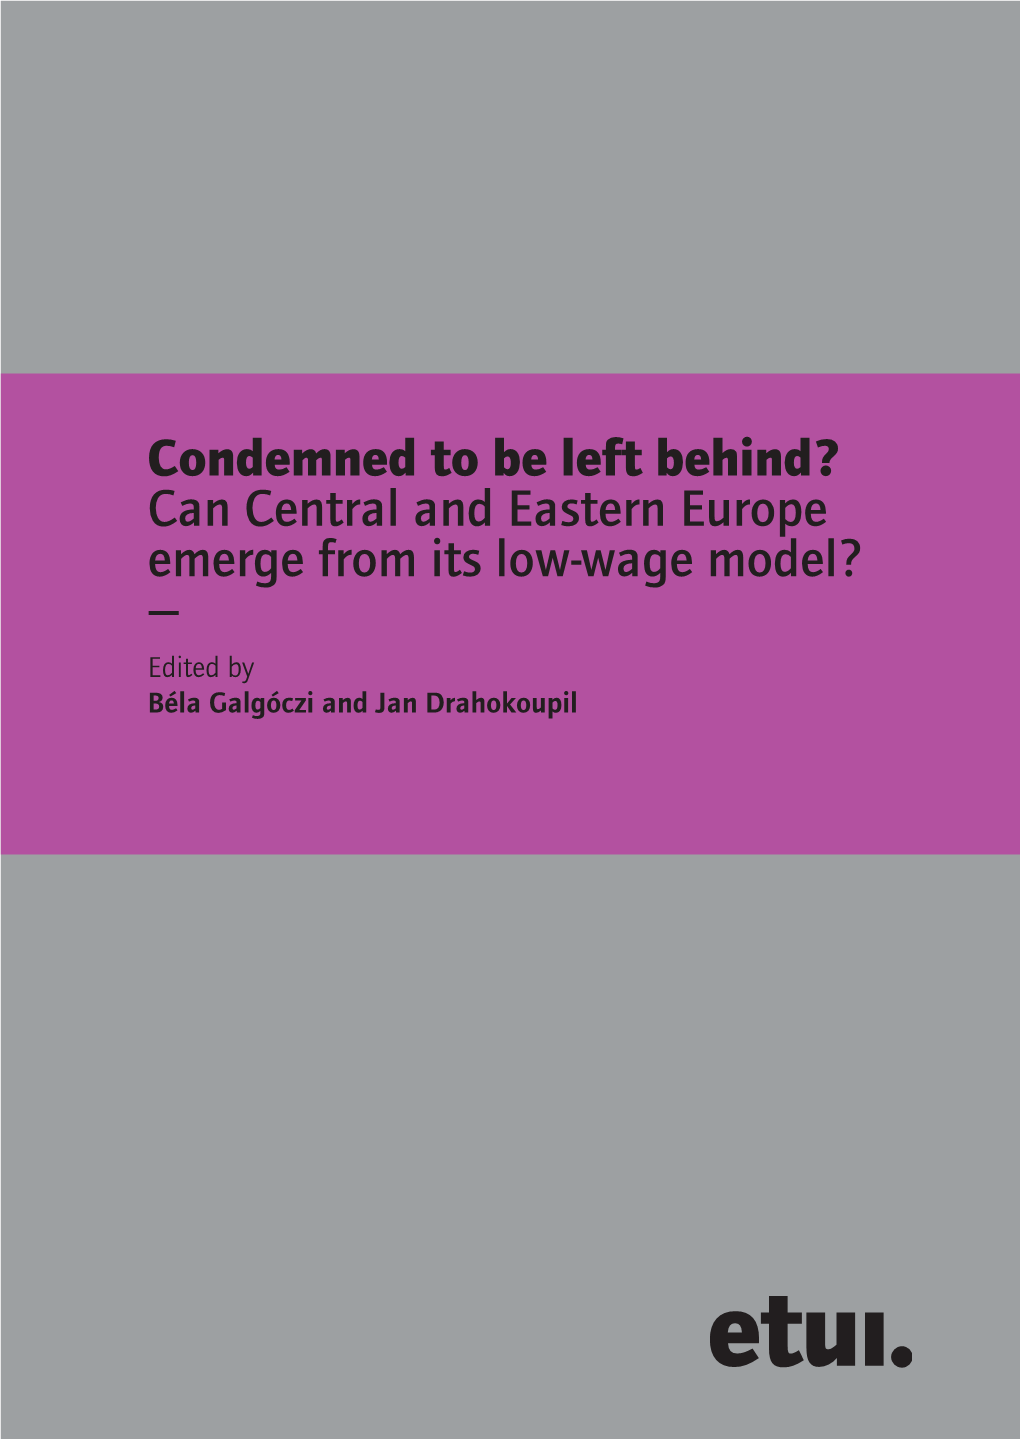 Can Central and Eastern Europe Emerge from Its Low-Wage Model ? — Edited by Béla Galgóczi and Jan Drahokoupil